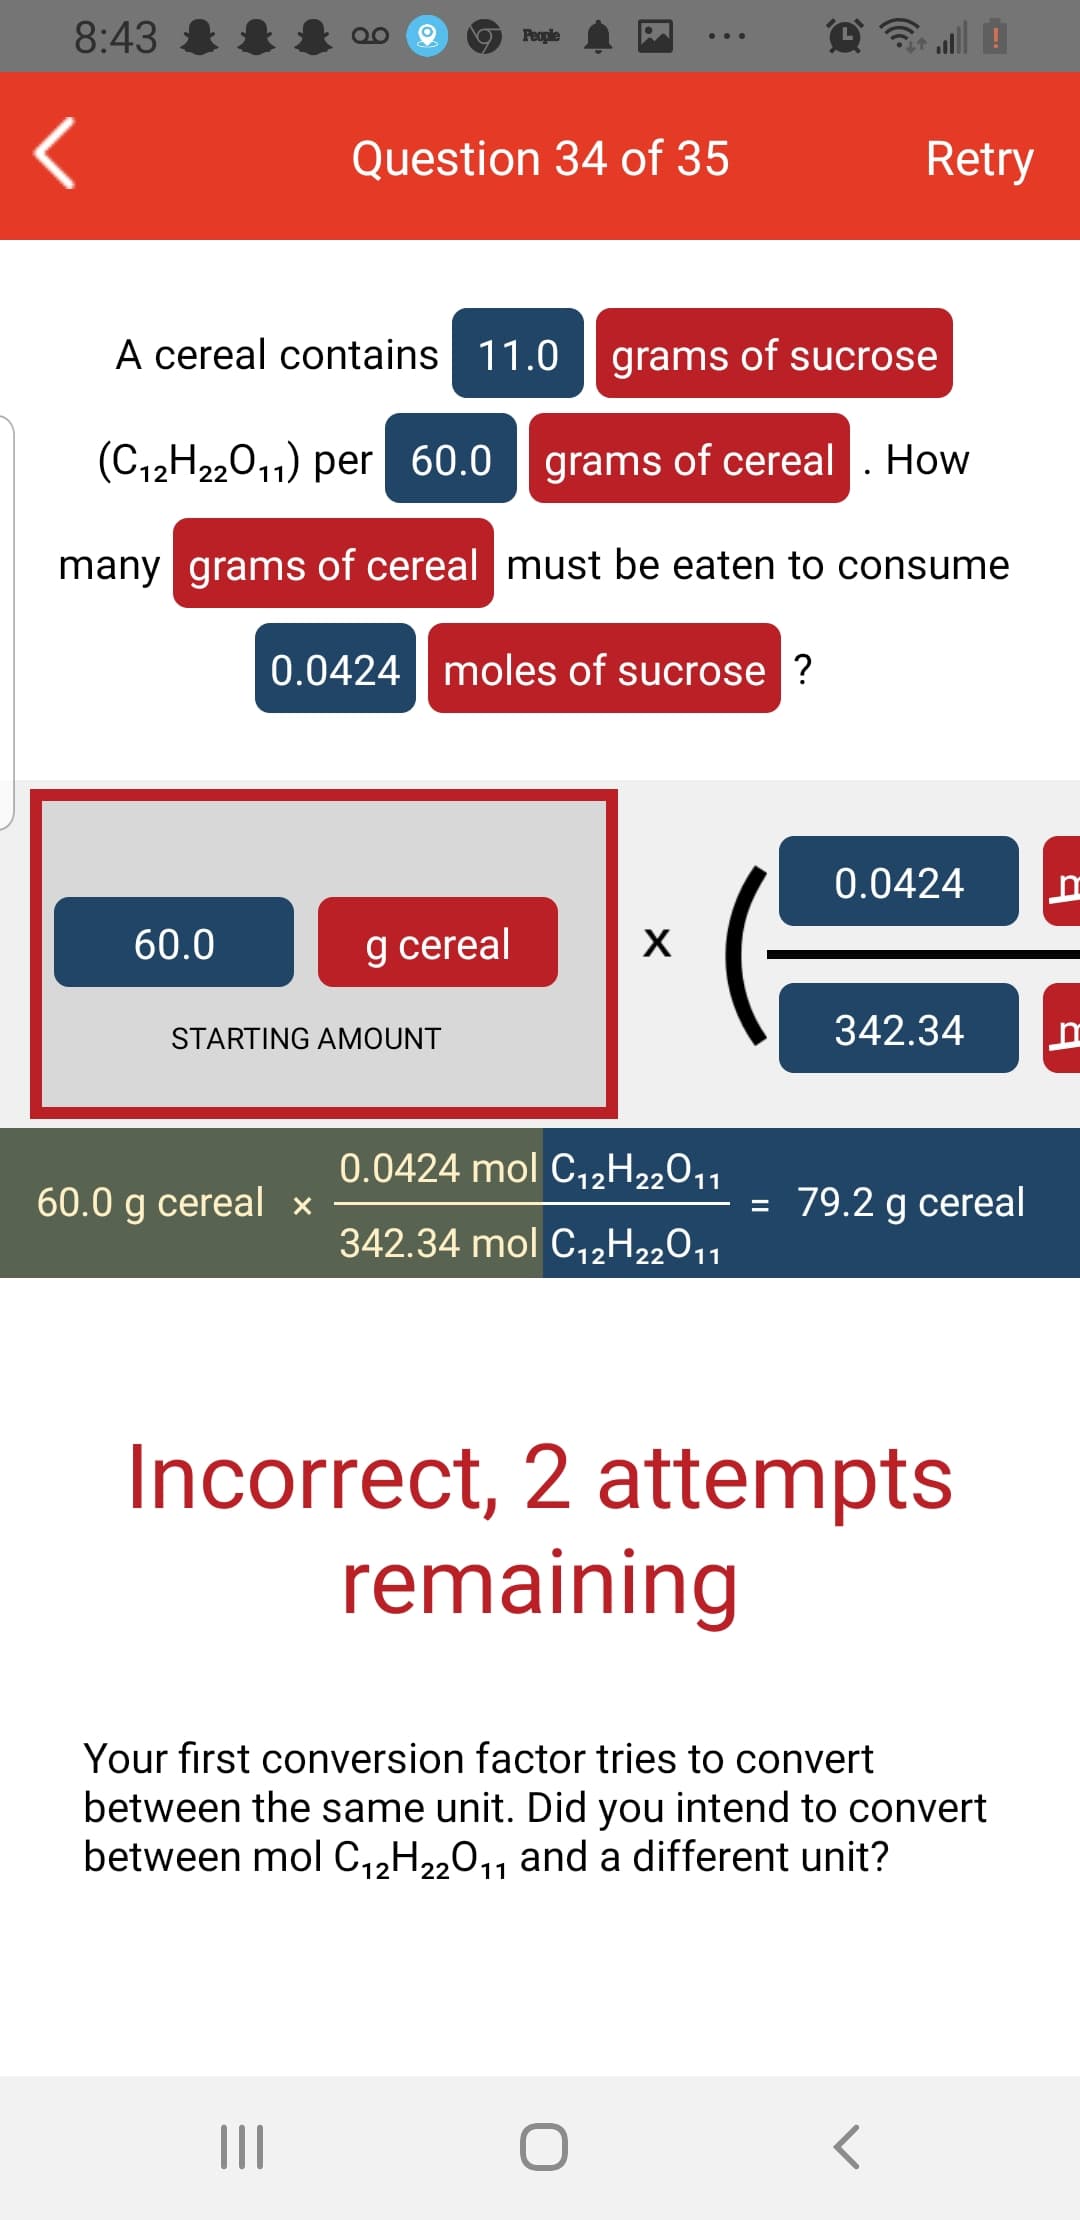 8:43 &
People
Question 34 of 35
Retry
A cereal contains 11.0
grams of sucrose
(C12H22011) per 60.0 |
grams of cereal . How
many grams of cereal must be eaten to consume
0.0424 moles of sucrose ?
0.0424
60.0
g cereal
X
STARTING AMOUNT
342.34
0.0424 mol C,2H22011
60.0 g cereal x
= 79.2 g cereal
342.34 mol C12H22011
Incorrect, 2 attempts
remaining
Your first conversion factor tries to convert
between the same unit. Did you intend to convert
between mol C,,H„0,, and a different unit?
11
